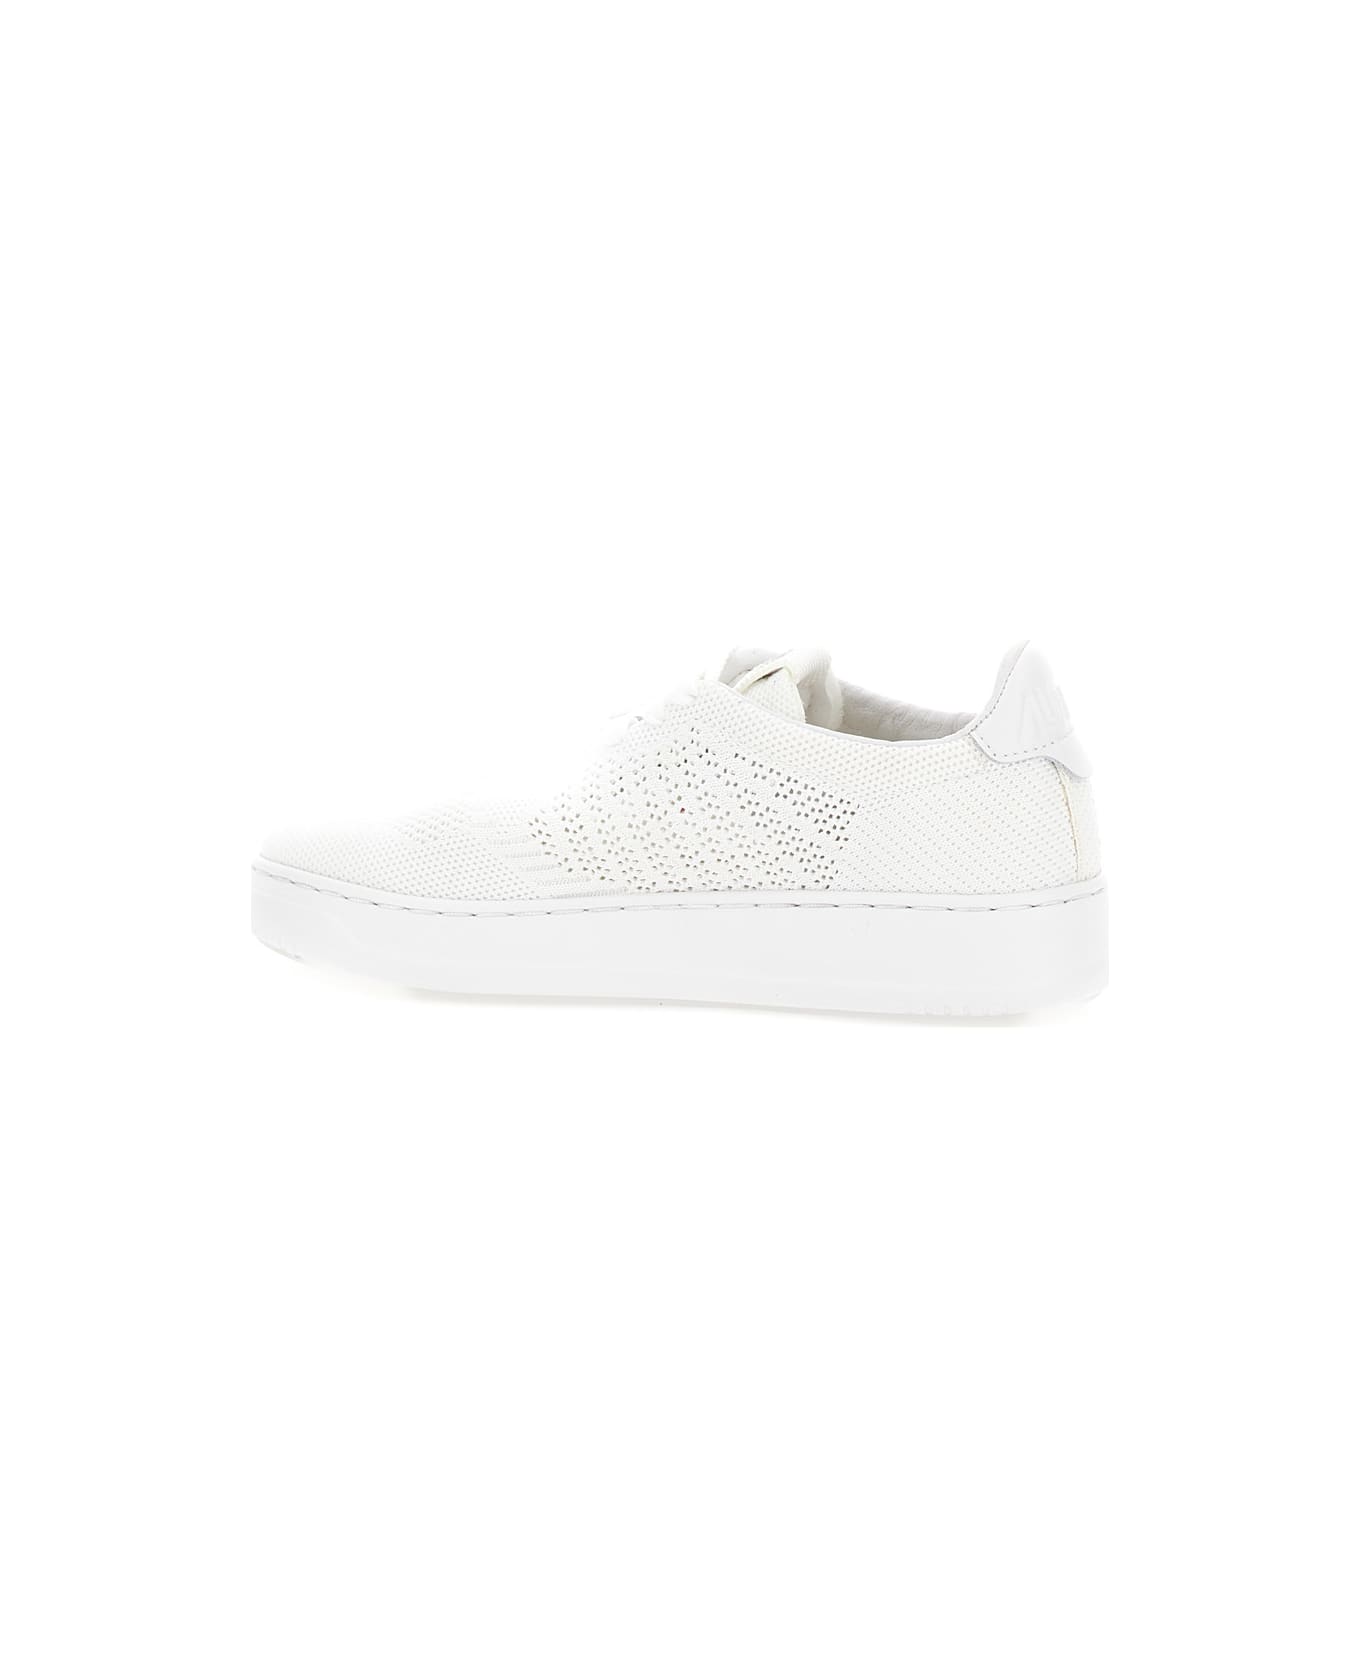 Autry 'medalist Easeknit' White Low Top Sneakers With Perforated Design In Knit Woman - White